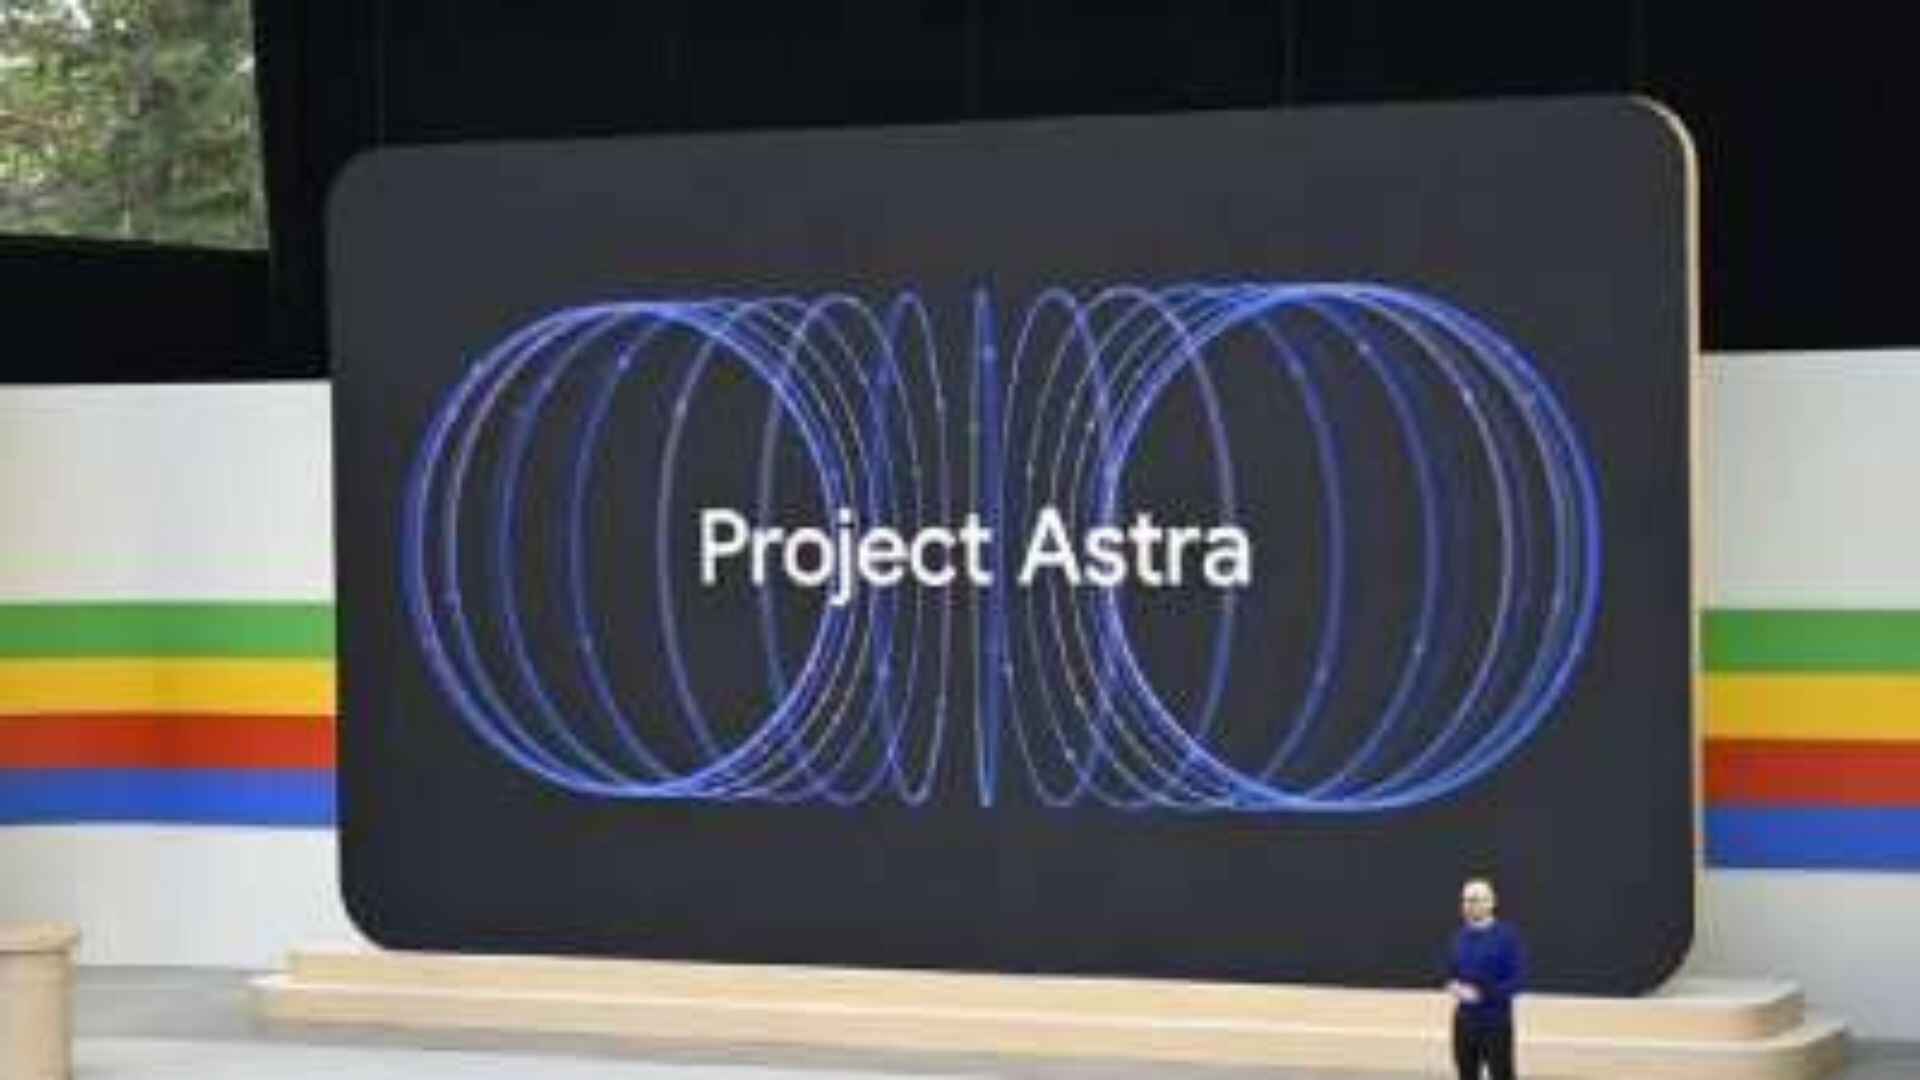 Project Astra – Advanced AI Assistant Enabling Real-Time Interaction Through Computer Vision